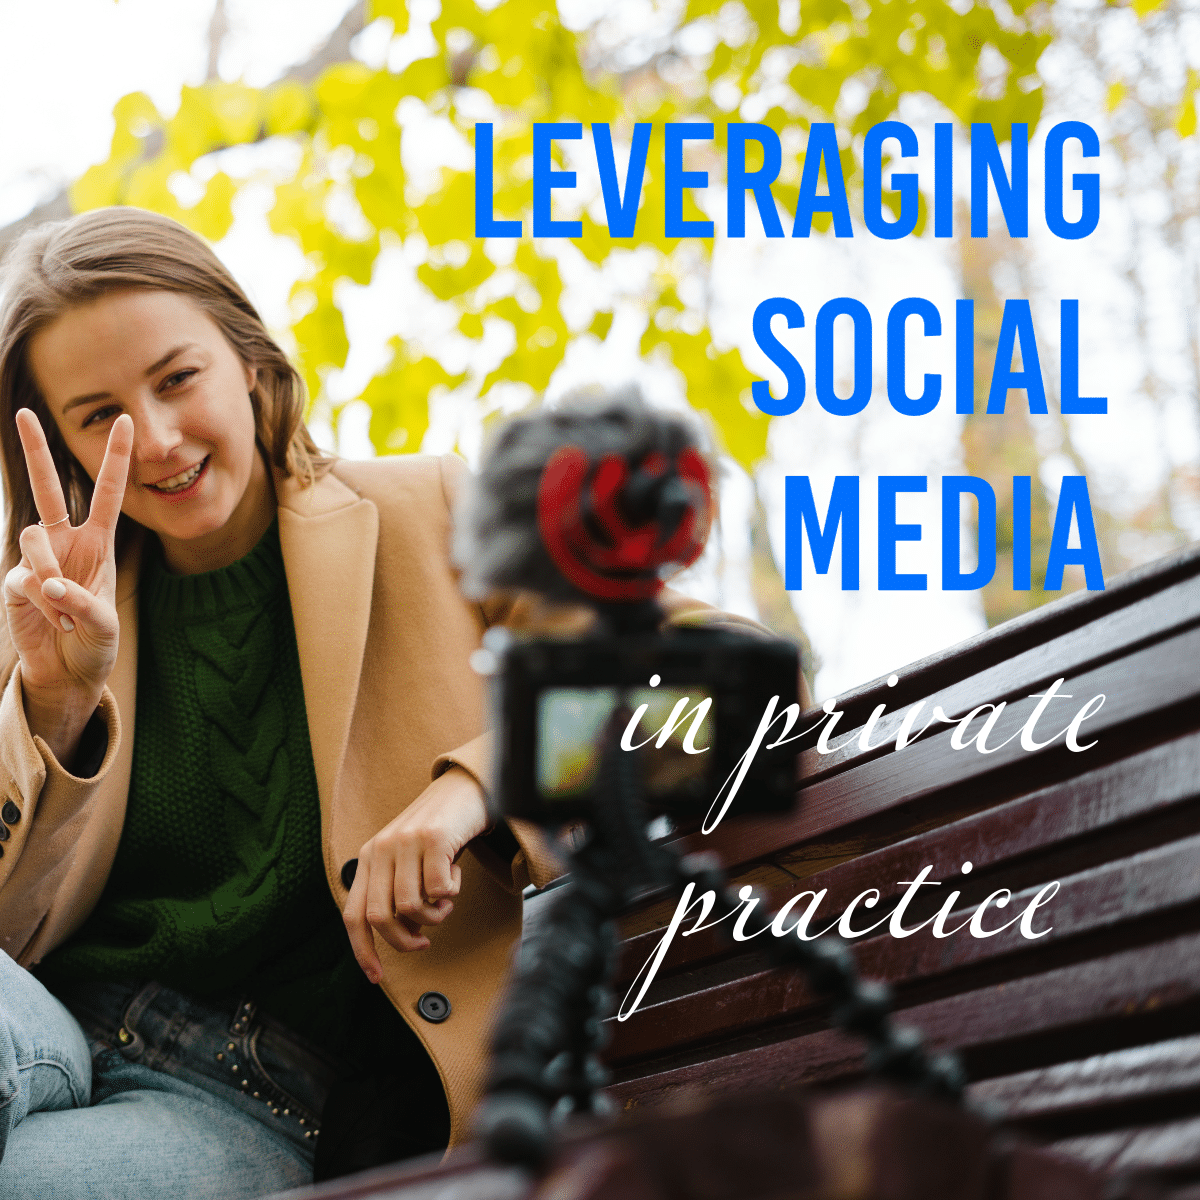 How to Leverage Social Media to Get More Patients for Your Therapy Practice?